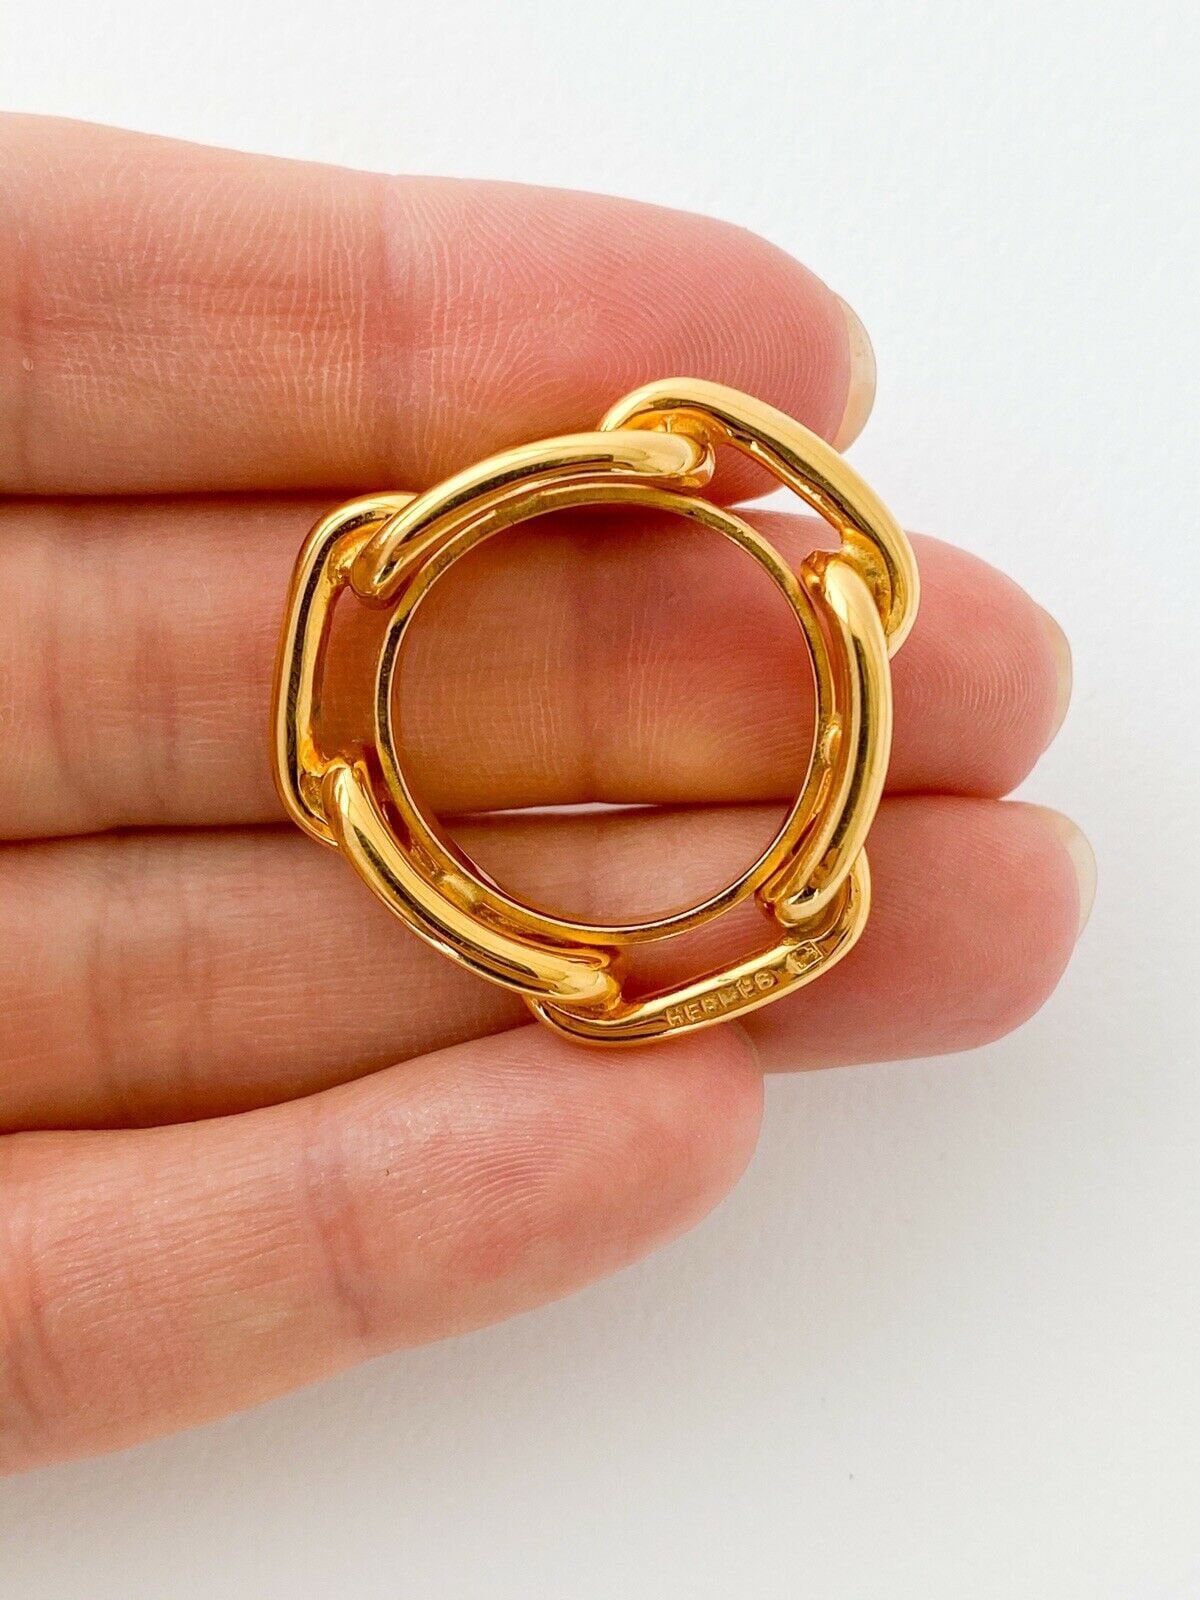 HERMES scarf ring Head Gold Plated gold Women Used –